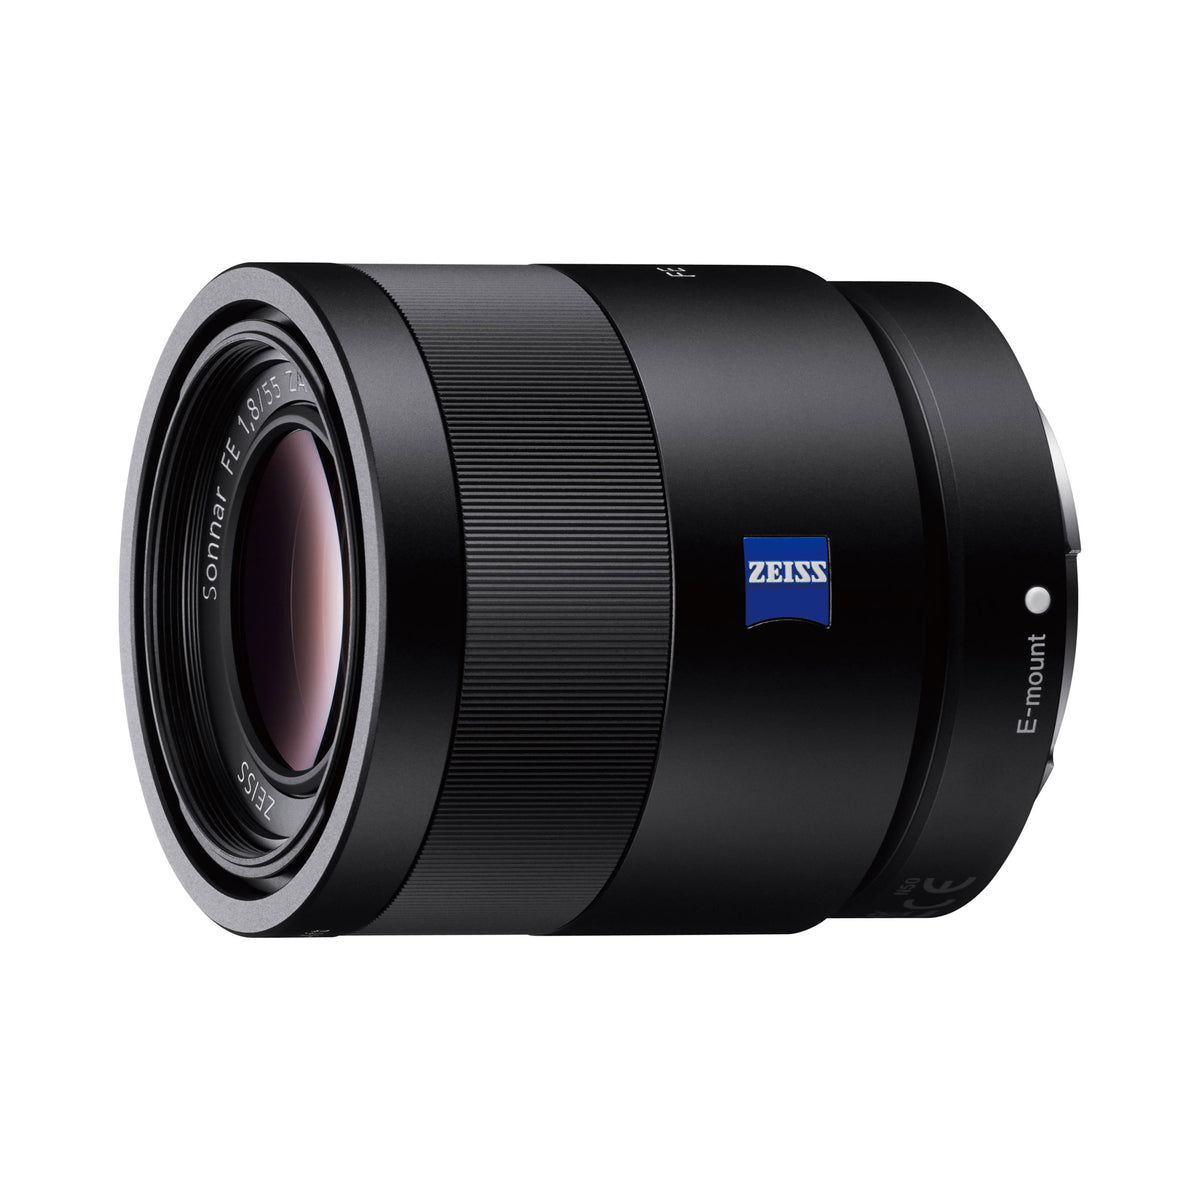 Sonnar T* FE 55mm F1.8 ZA — The Sony Shop